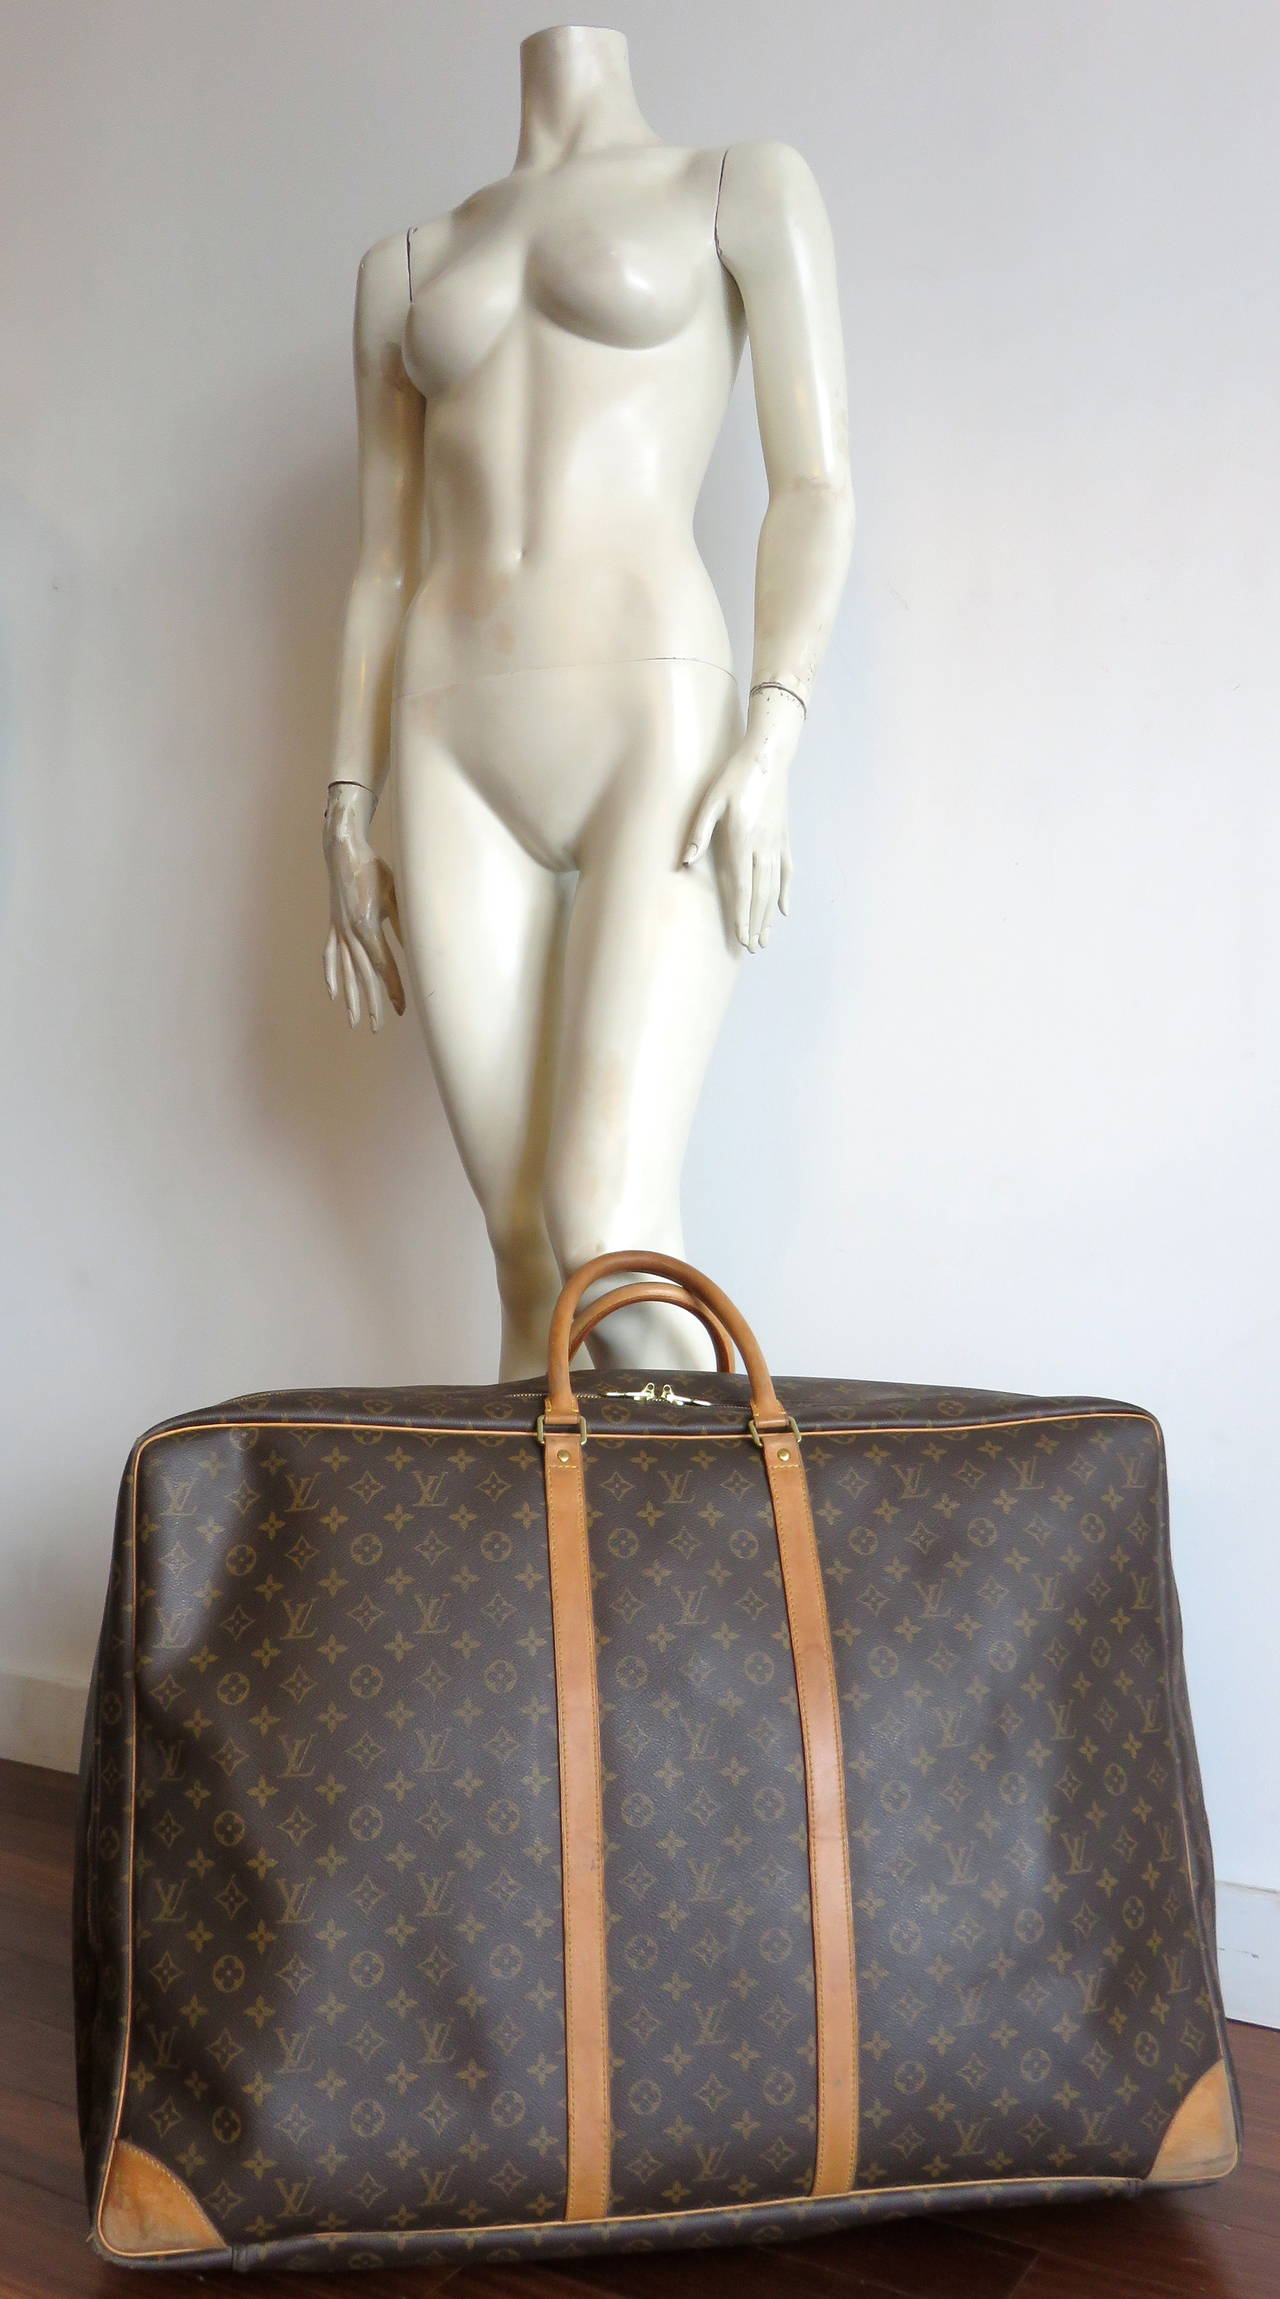 LOUIS VUITTON Monogram Sirius 70, large size travel luggage.

This stylish soft suitcase is finely crafted of Louis Vuitton monogram on toile canvas. 

This bag features vachetta cowhide leather trim and rolled leather top handles with polished